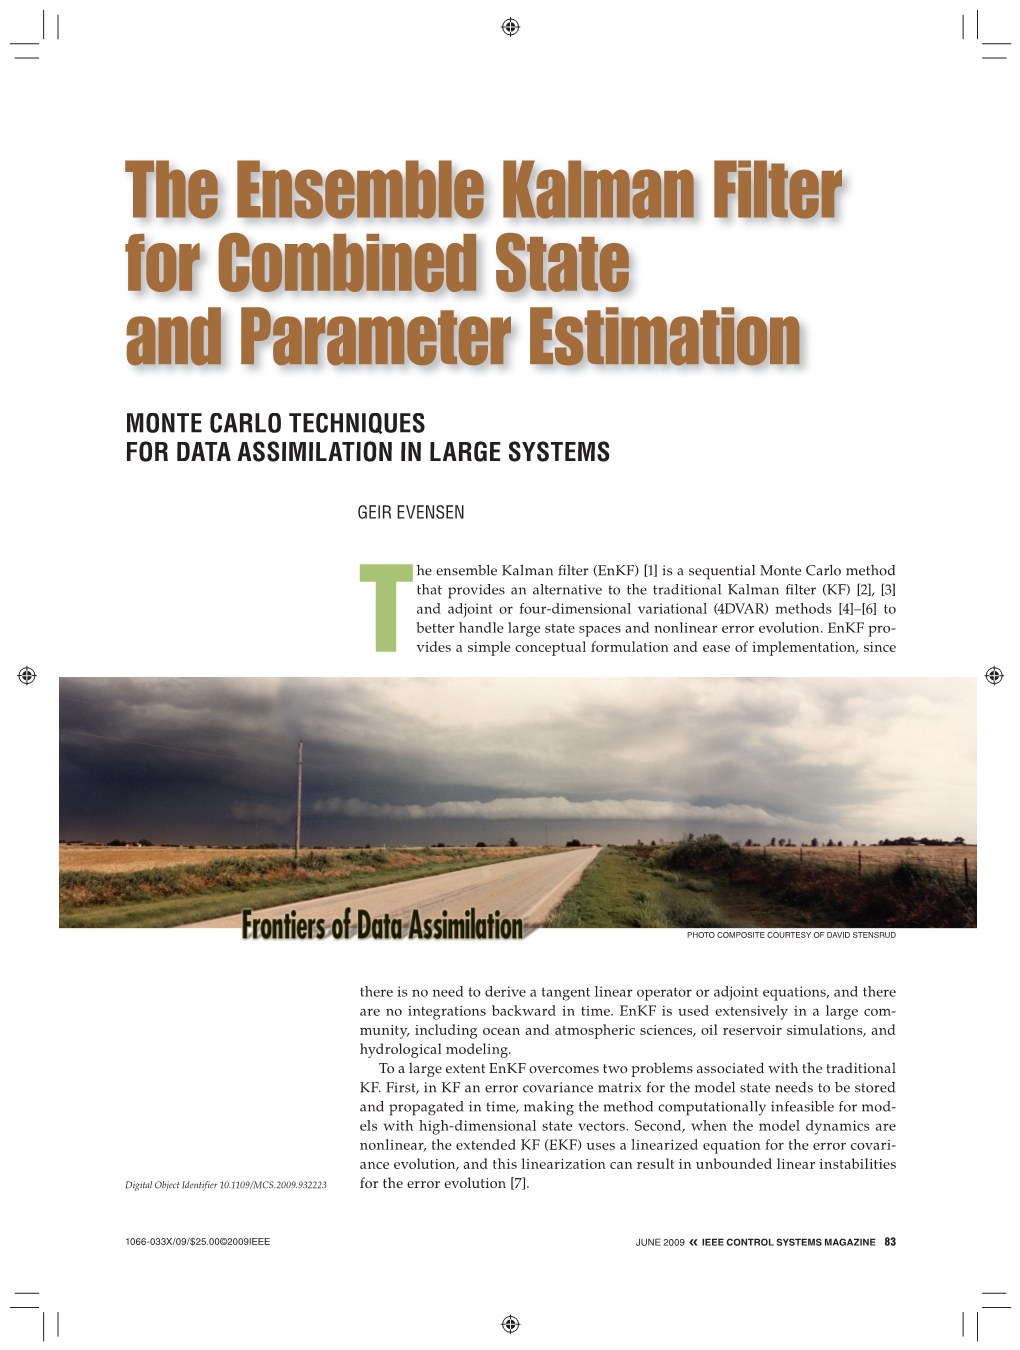 The Ensemble Kalman Filter for Combined State and Parameter Estimation